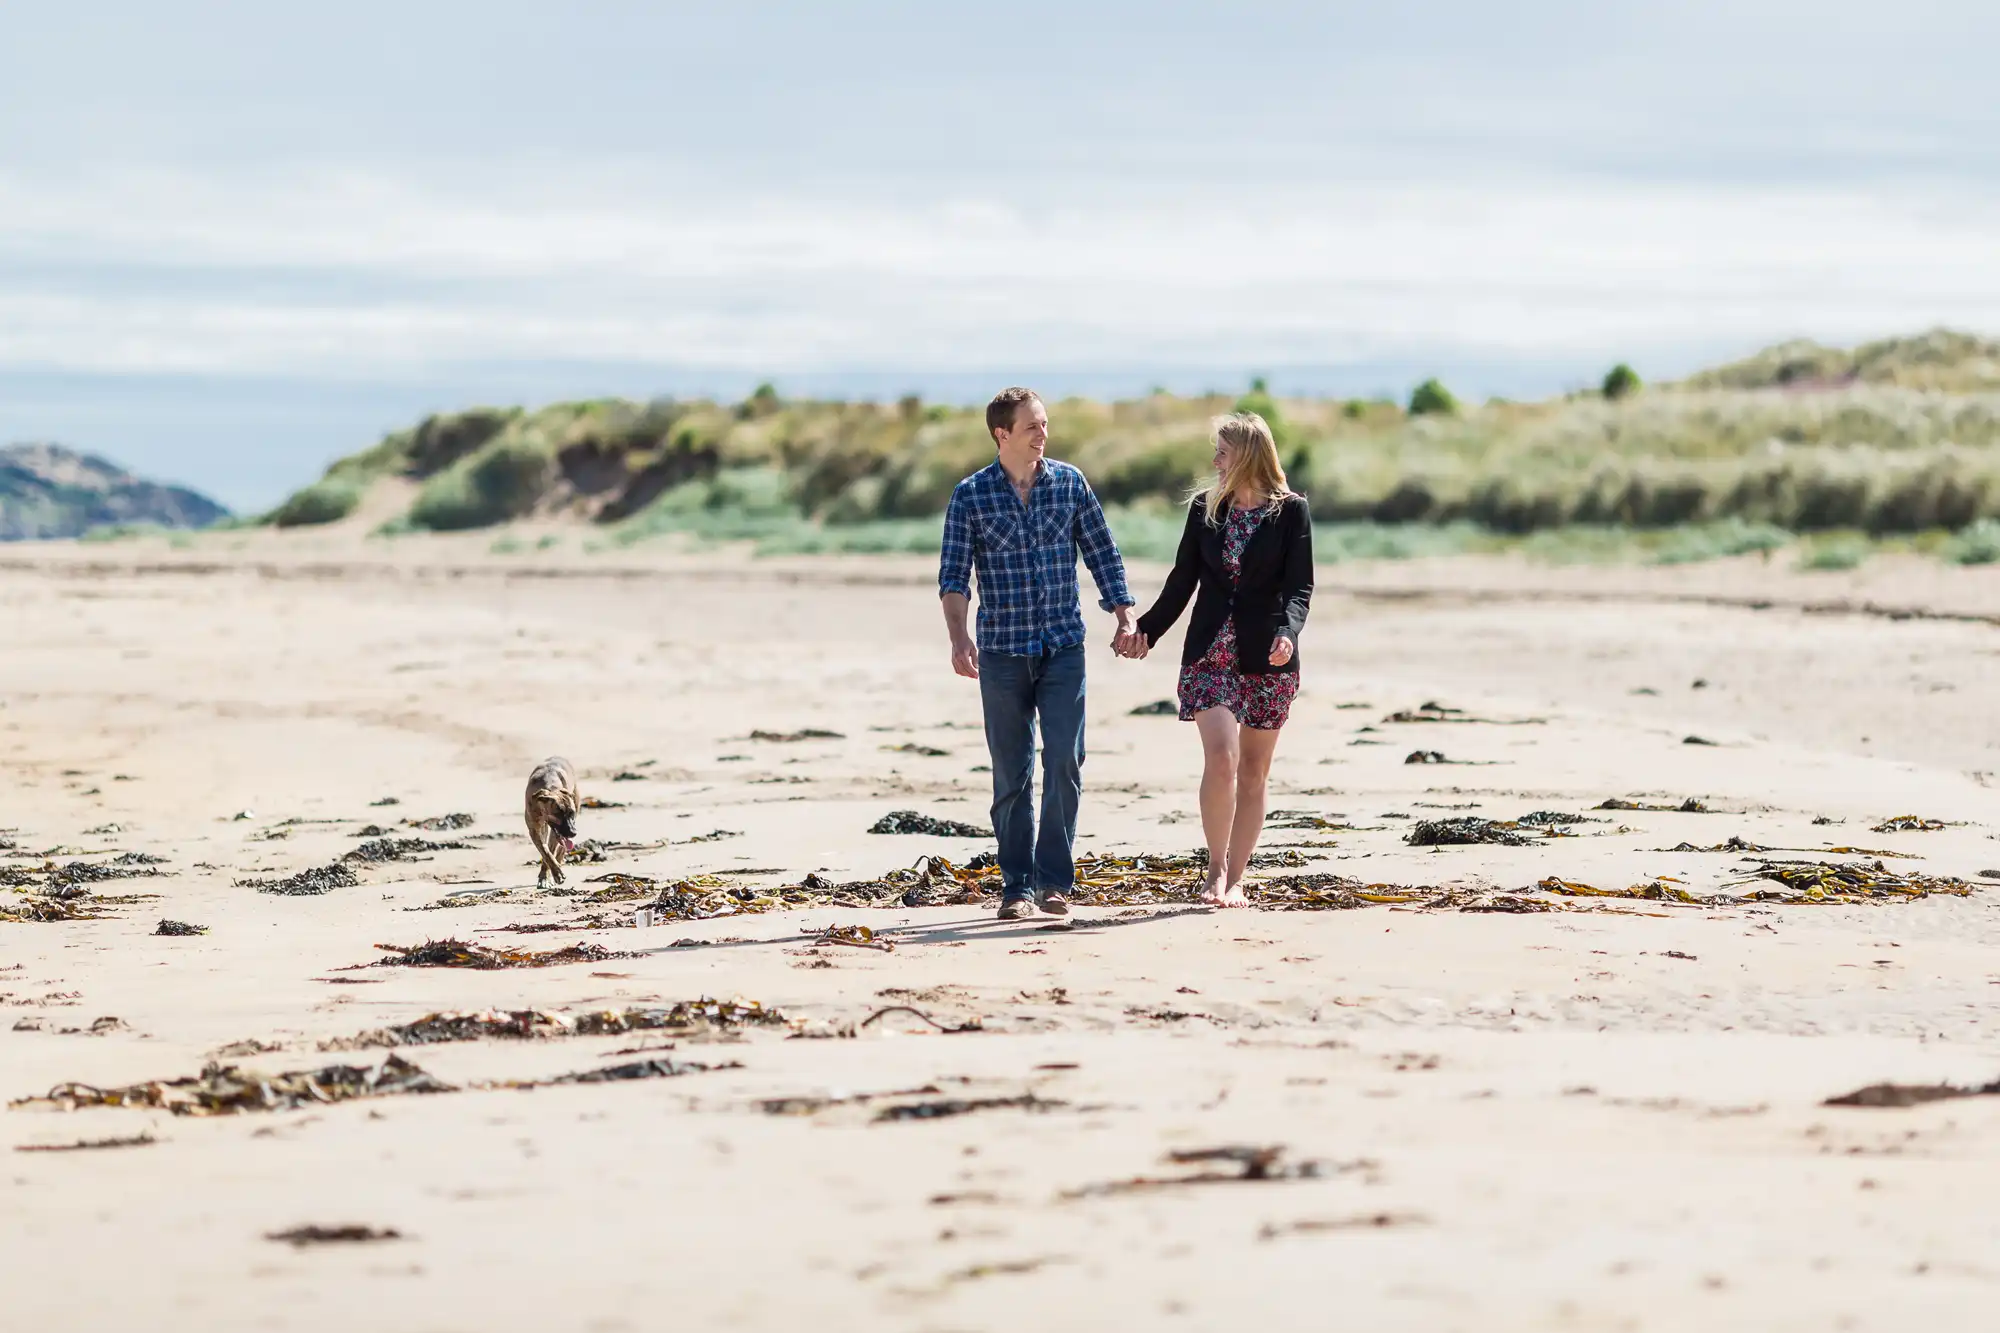 A couple holding hands walks on a sandy beach with a small dog nearby, with grassy dunes in the background.